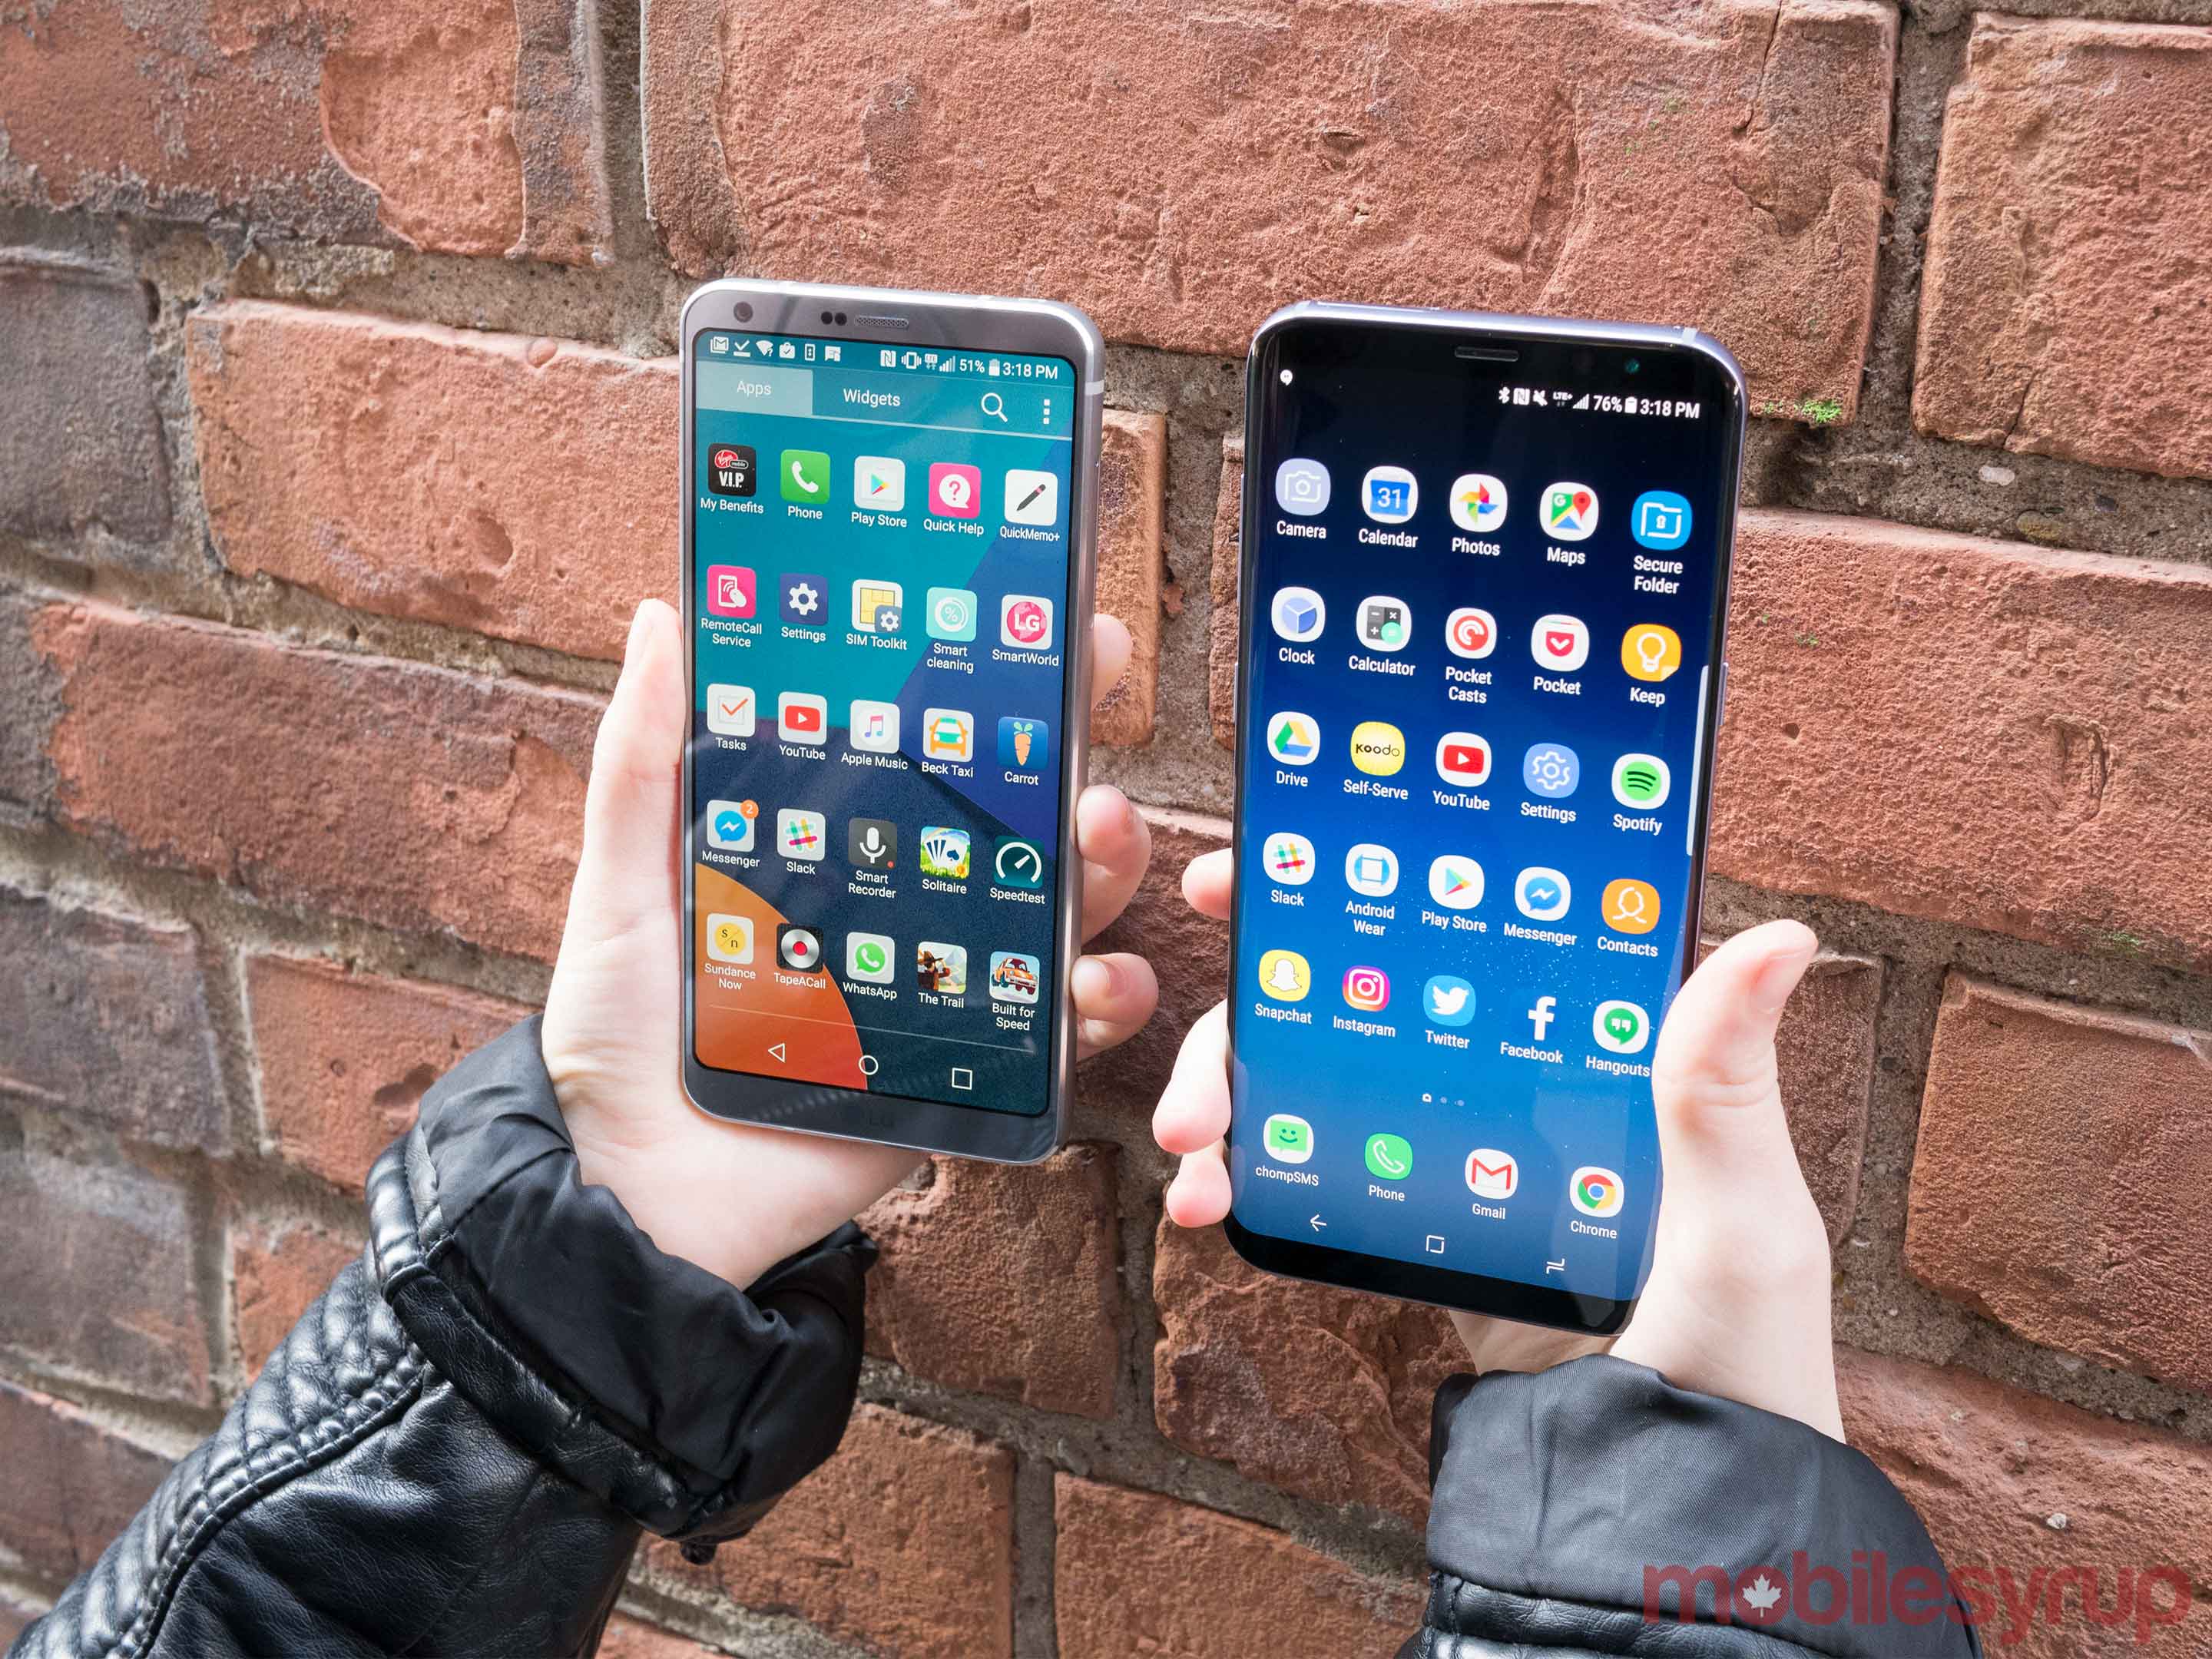 Galaxy S8 and LG G6 against a brick wall